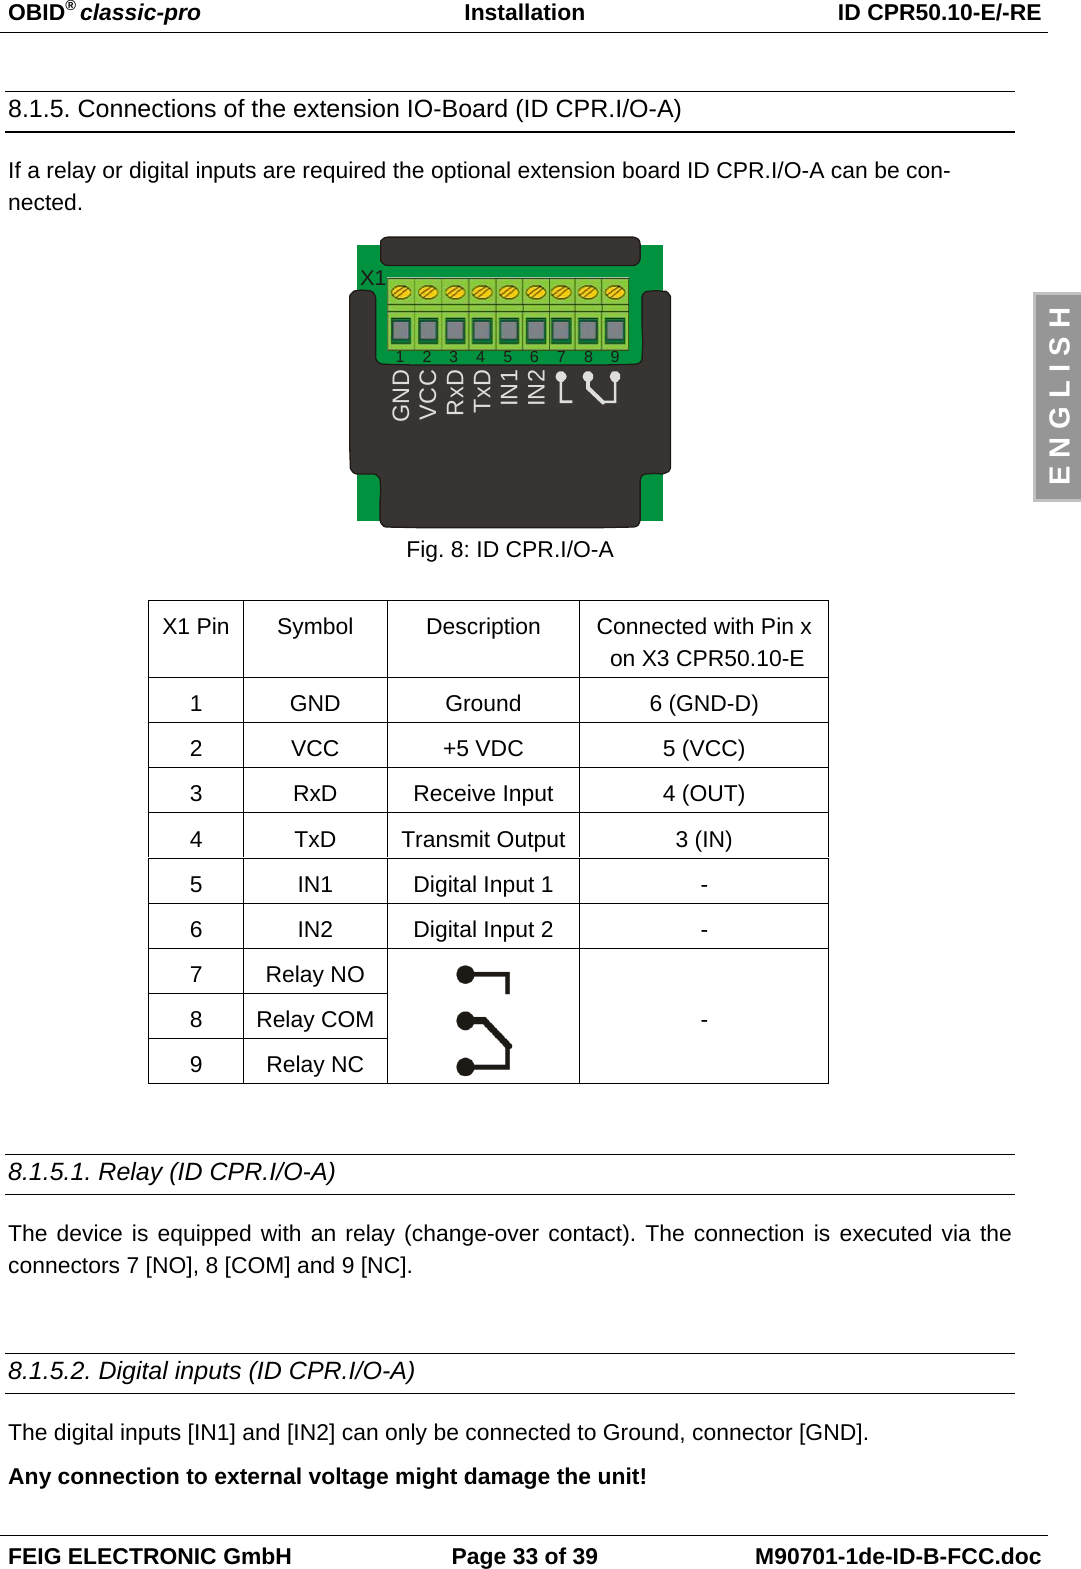 OBID® classic-pro Installation ID CPR50.10-E/-REFEIG ELECTRONIC GmbH Page 33 of 39 M90701-1de-ID-B-FCC.docE N G L I S H8.1.5. Connections of the extension IO-Board (ID CPR.I/O-A)If a relay or digital inputs are required the optional extension board ID CPR.I/O-A can be con-nected.GNDVCCRxDTxDIN1IN21    2    3    4    5    6    7    8    9X1Fig. 8: ID CPR.I/O-AX1 Pin Symbol Description Connected with Pin x on X3 CPR50.10-E1GND Ground 6 (GND-D)2VCC +5 VDC 5 (VCC)3RxD Receive Input 4 (OUT)4TxD Transmit Output 3 (IN)5 IN1 Digital Input 1 -6 IN2 Digital Input 2 -7Relay NO8Relay COM9Relay NC-8.1.5.1. Relay (ID CPR.I/O-A)The device is equipped with an relay (change-over contact). The connection is executed via theconnectors 7 [NO], 8 [COM] and 9 [NC].8.1.5.2. Digital inputs (ID CPR.I/O-A)The digital inputs [IN1] and [IN2] can only be connected to Ground, connector [GND].Any connection to external voltage might damage the unit!